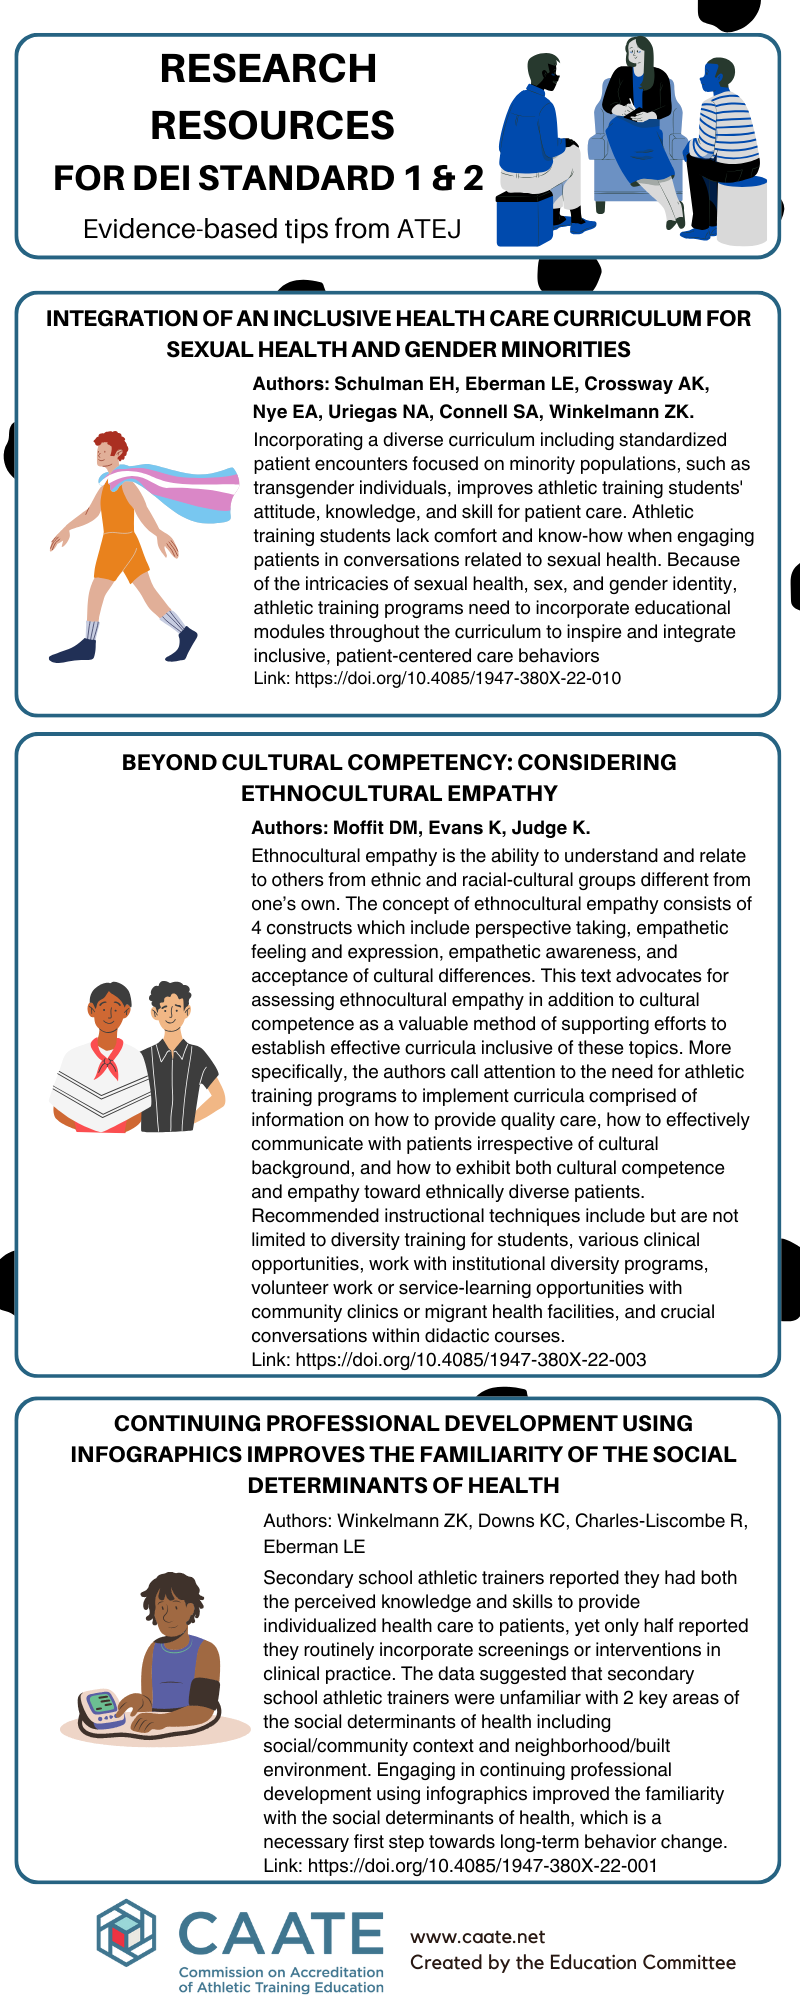 Evidence-based tips from ATEJ: •	Integration of an inclusive health care curriculum for sexual health and gender minorities •	Beyond cultural competency: considering ethnocultural empathy •	Continuing professional development using Infographics improves the familiarity of the social determinants of health